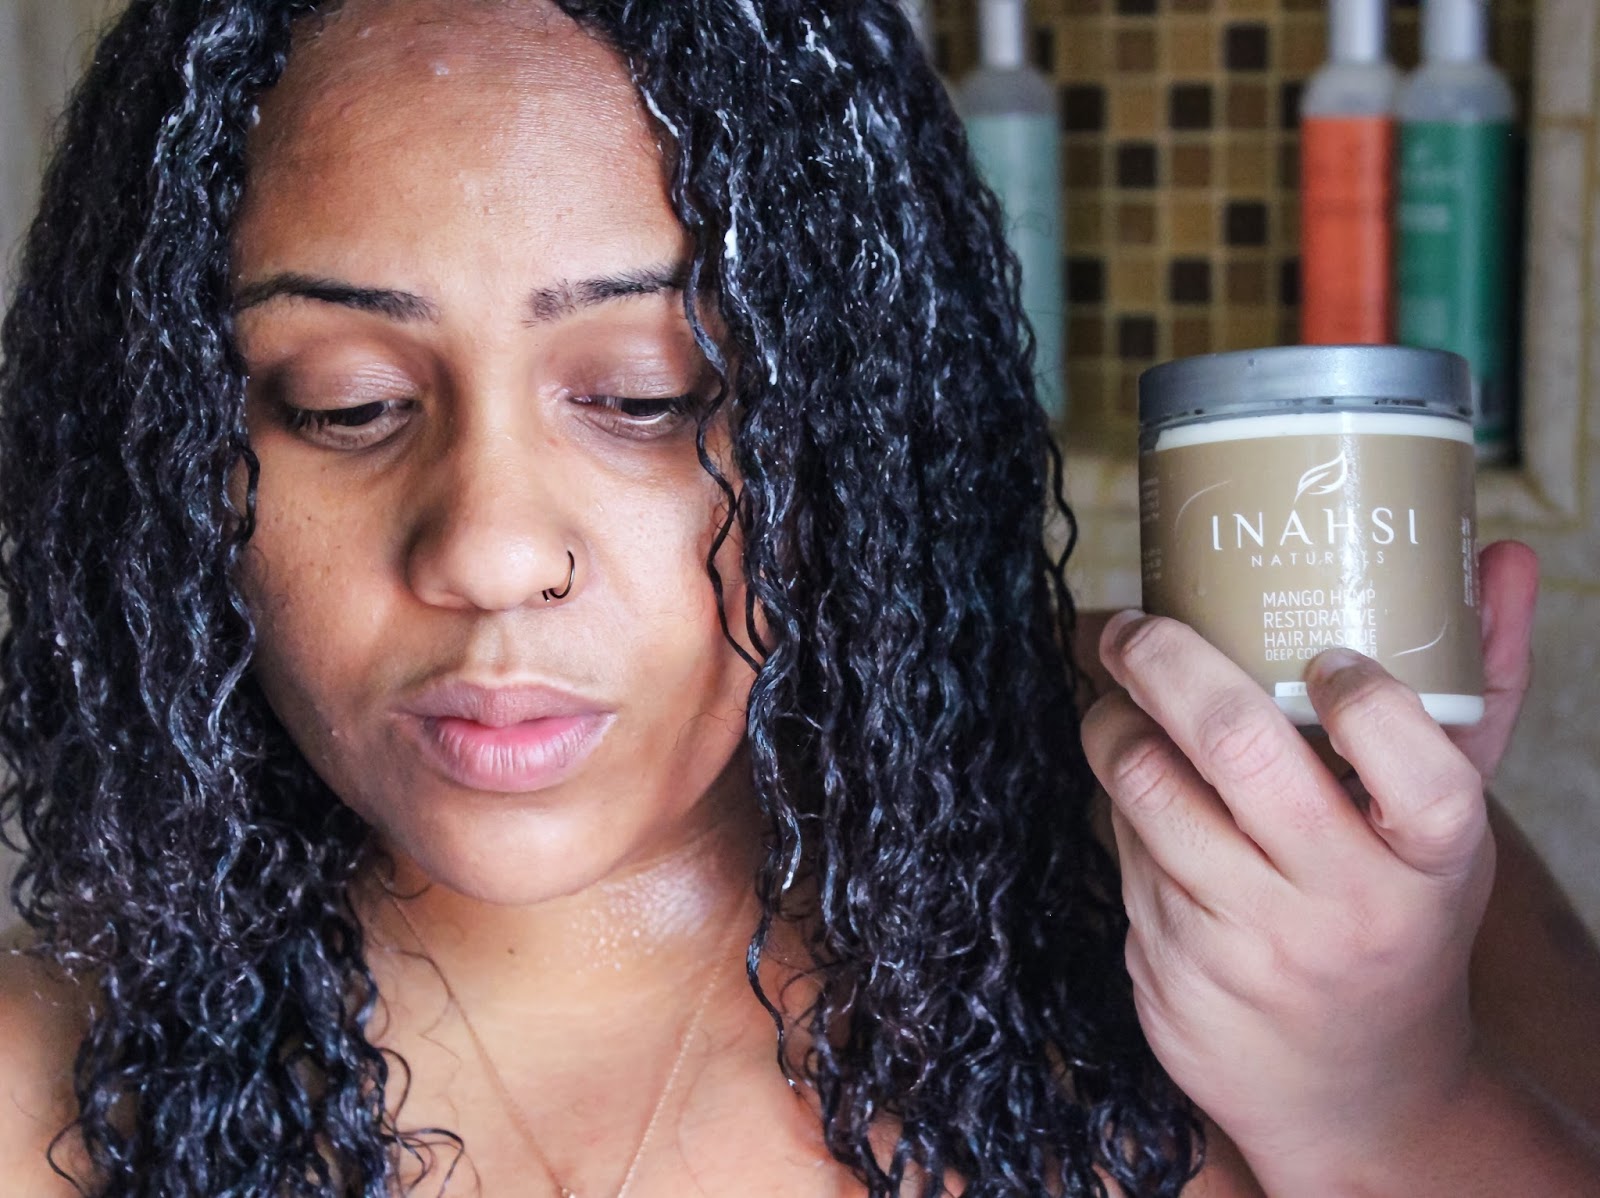 Co-Washing, Shampooing, and Clarifying - What's the Difference, and Are  They Necessary? featuring Inahsi Naturals | The Mane Objective